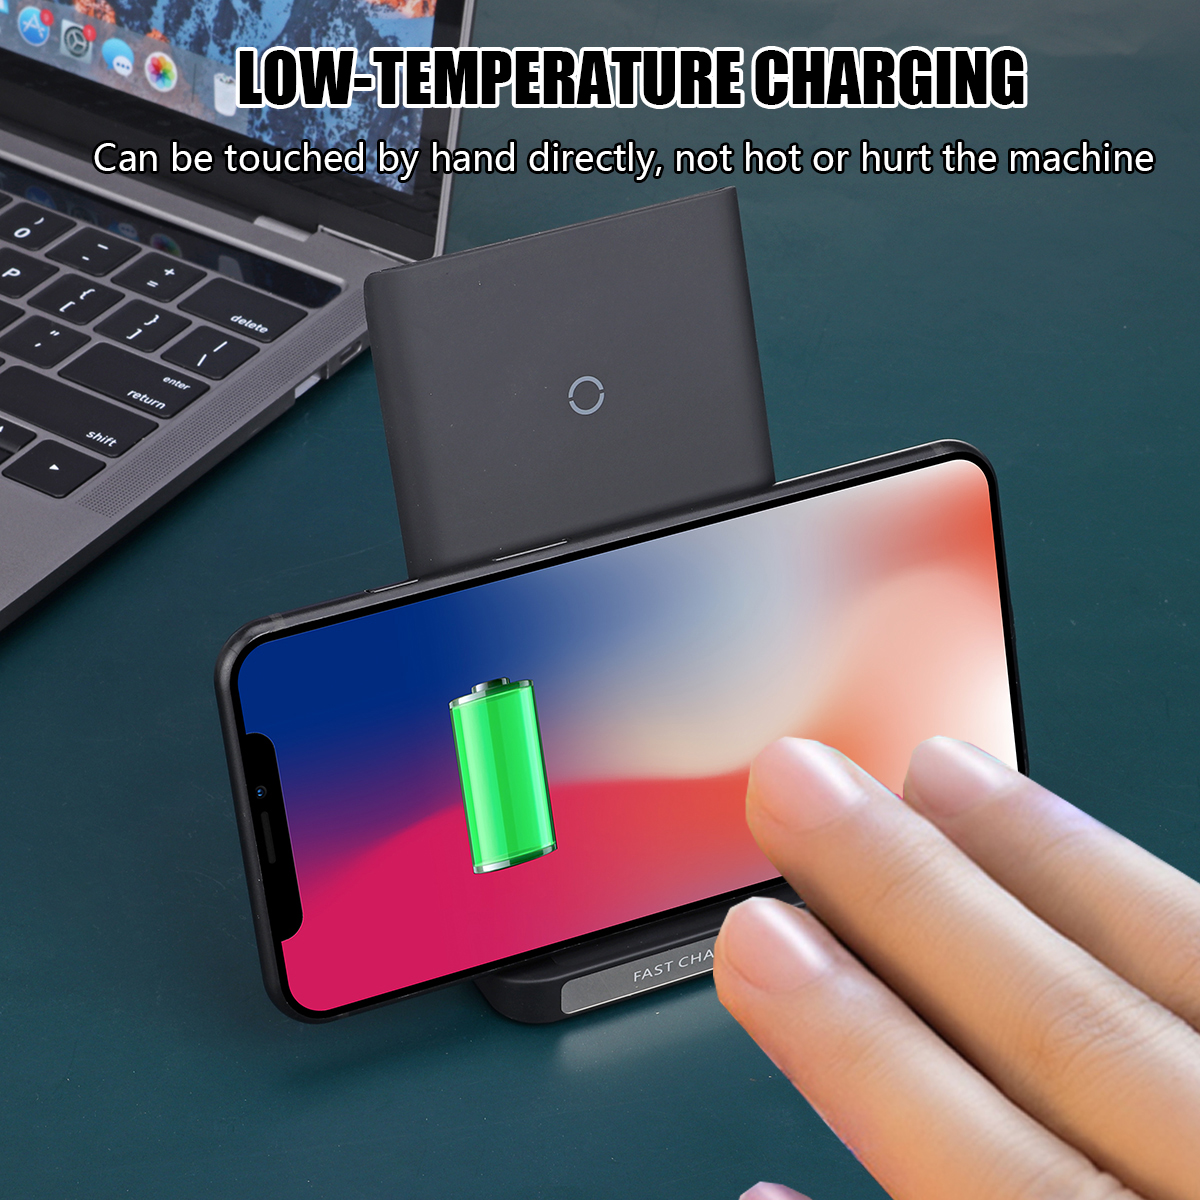 20W Qi Wireless Charger Fast Charging Phone Holder Stand For Qi-enabled Smart Phone For iPhone 11 Pro Max For Samsung Galaxy 20